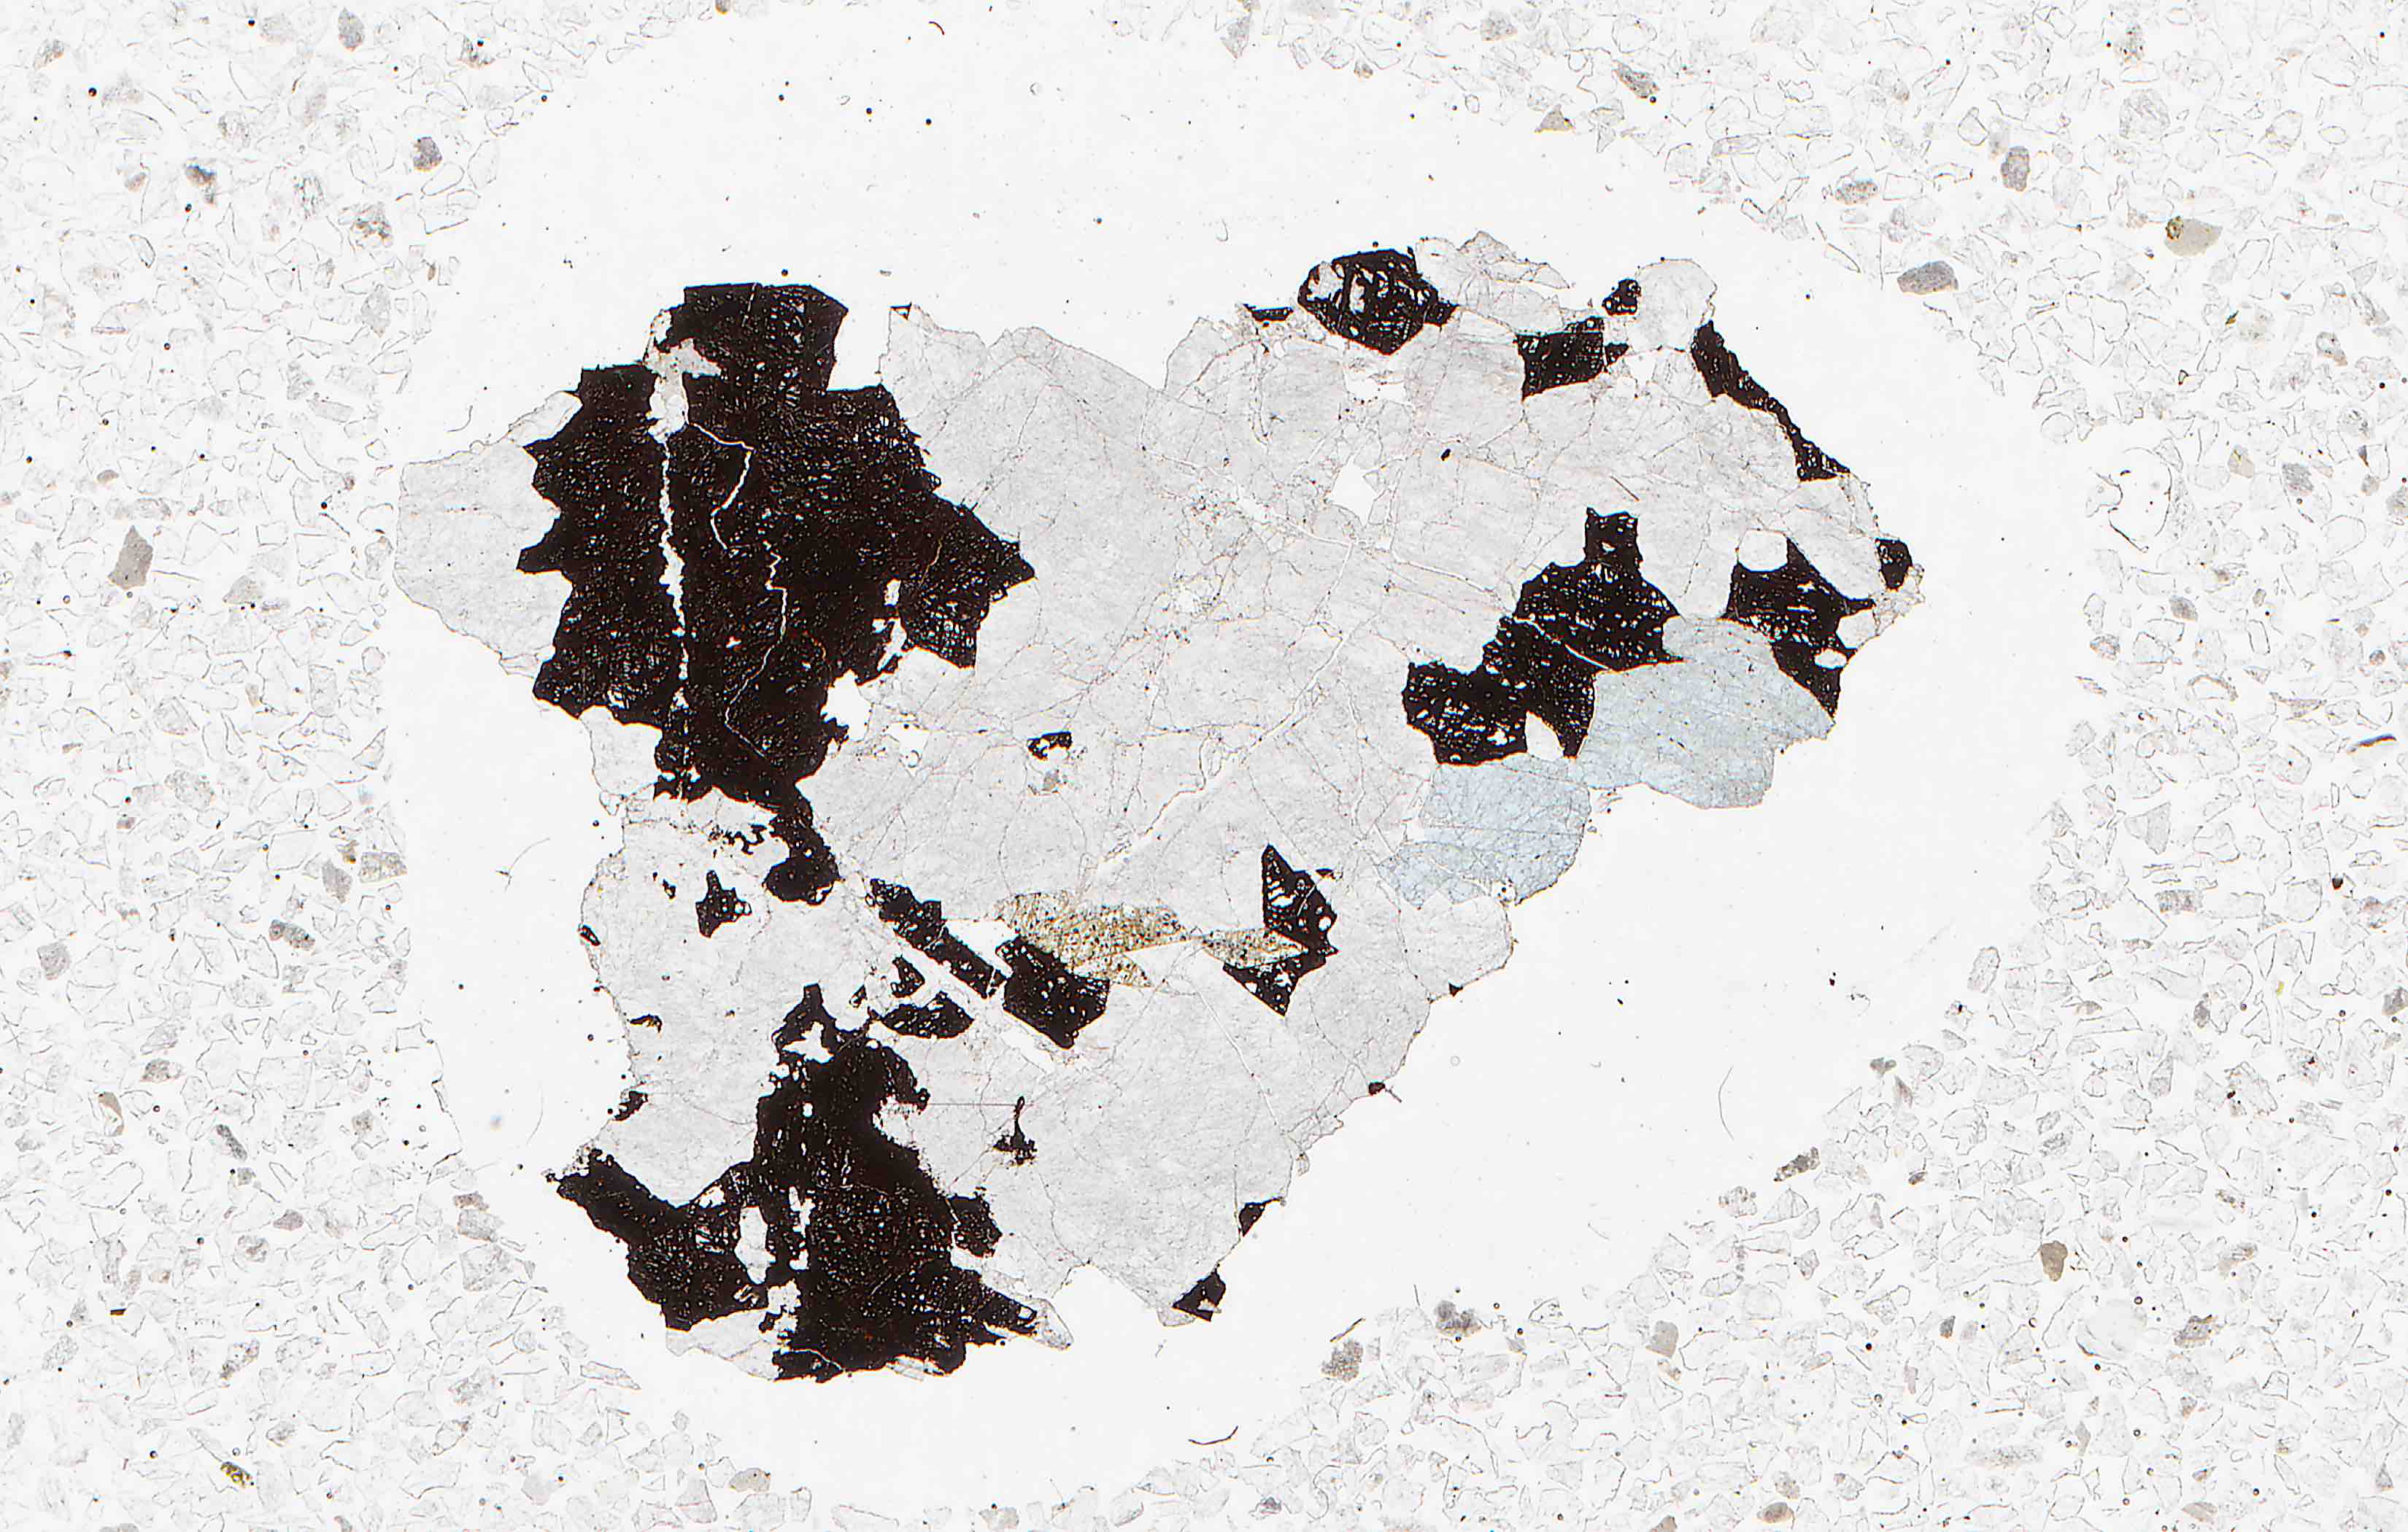 lazulite in thin section from Austria